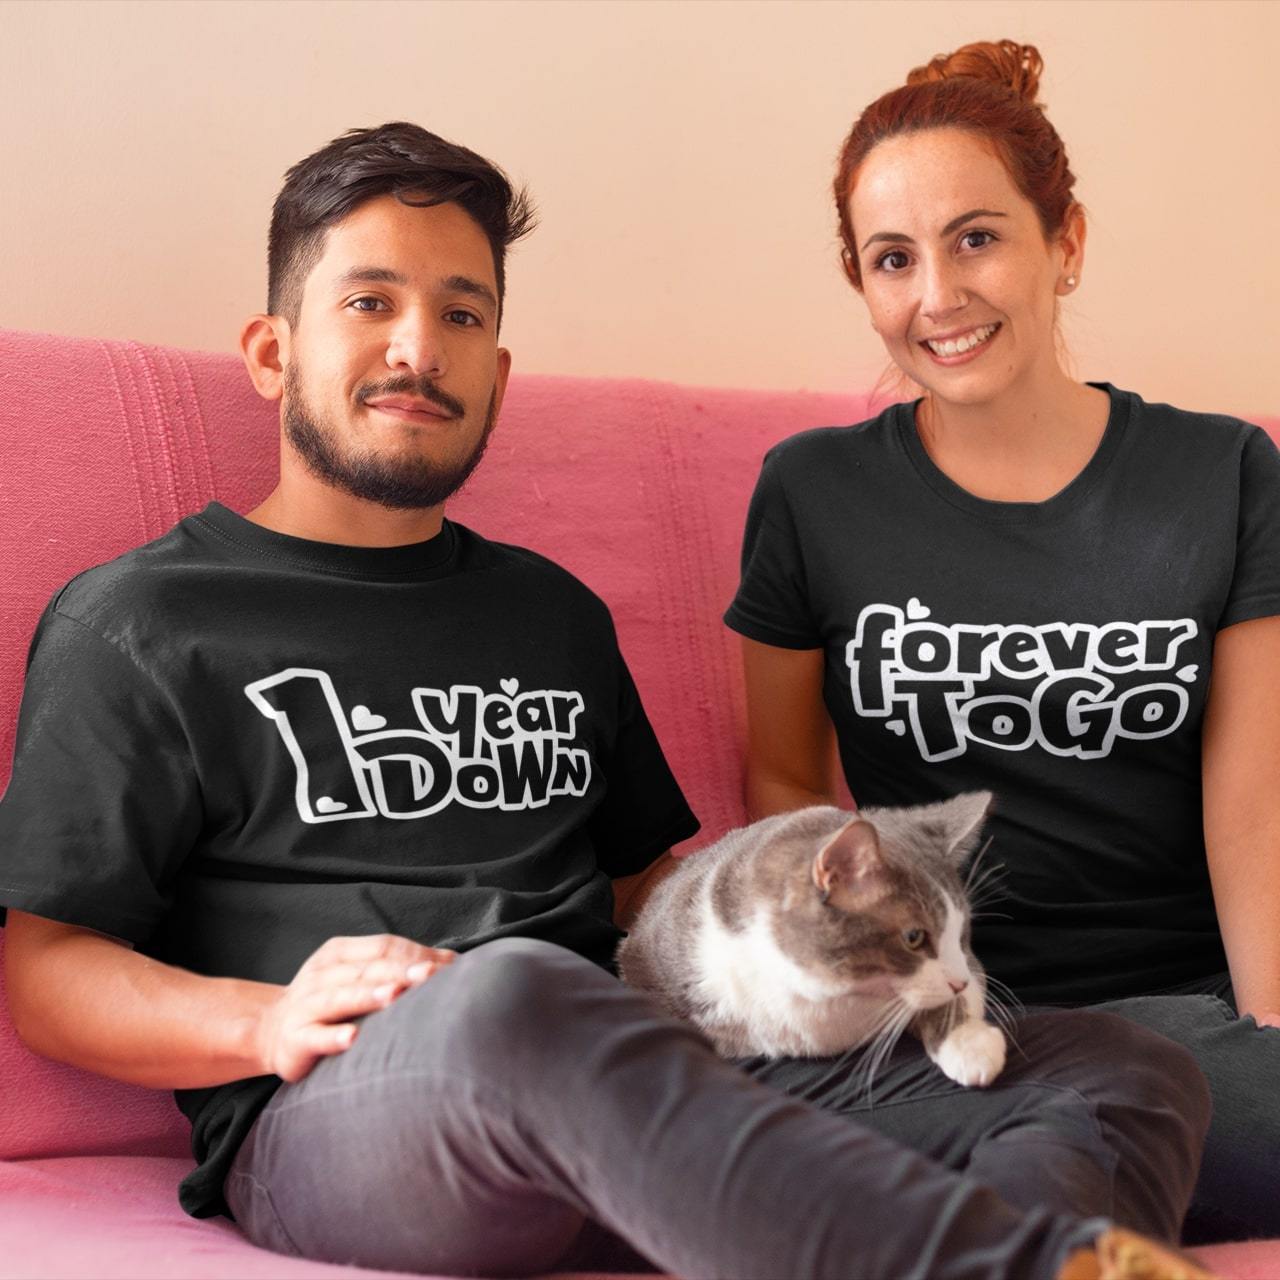 Bazarville Couple Design S / XS 1 Year Down, Forever To Go - Couple Tee